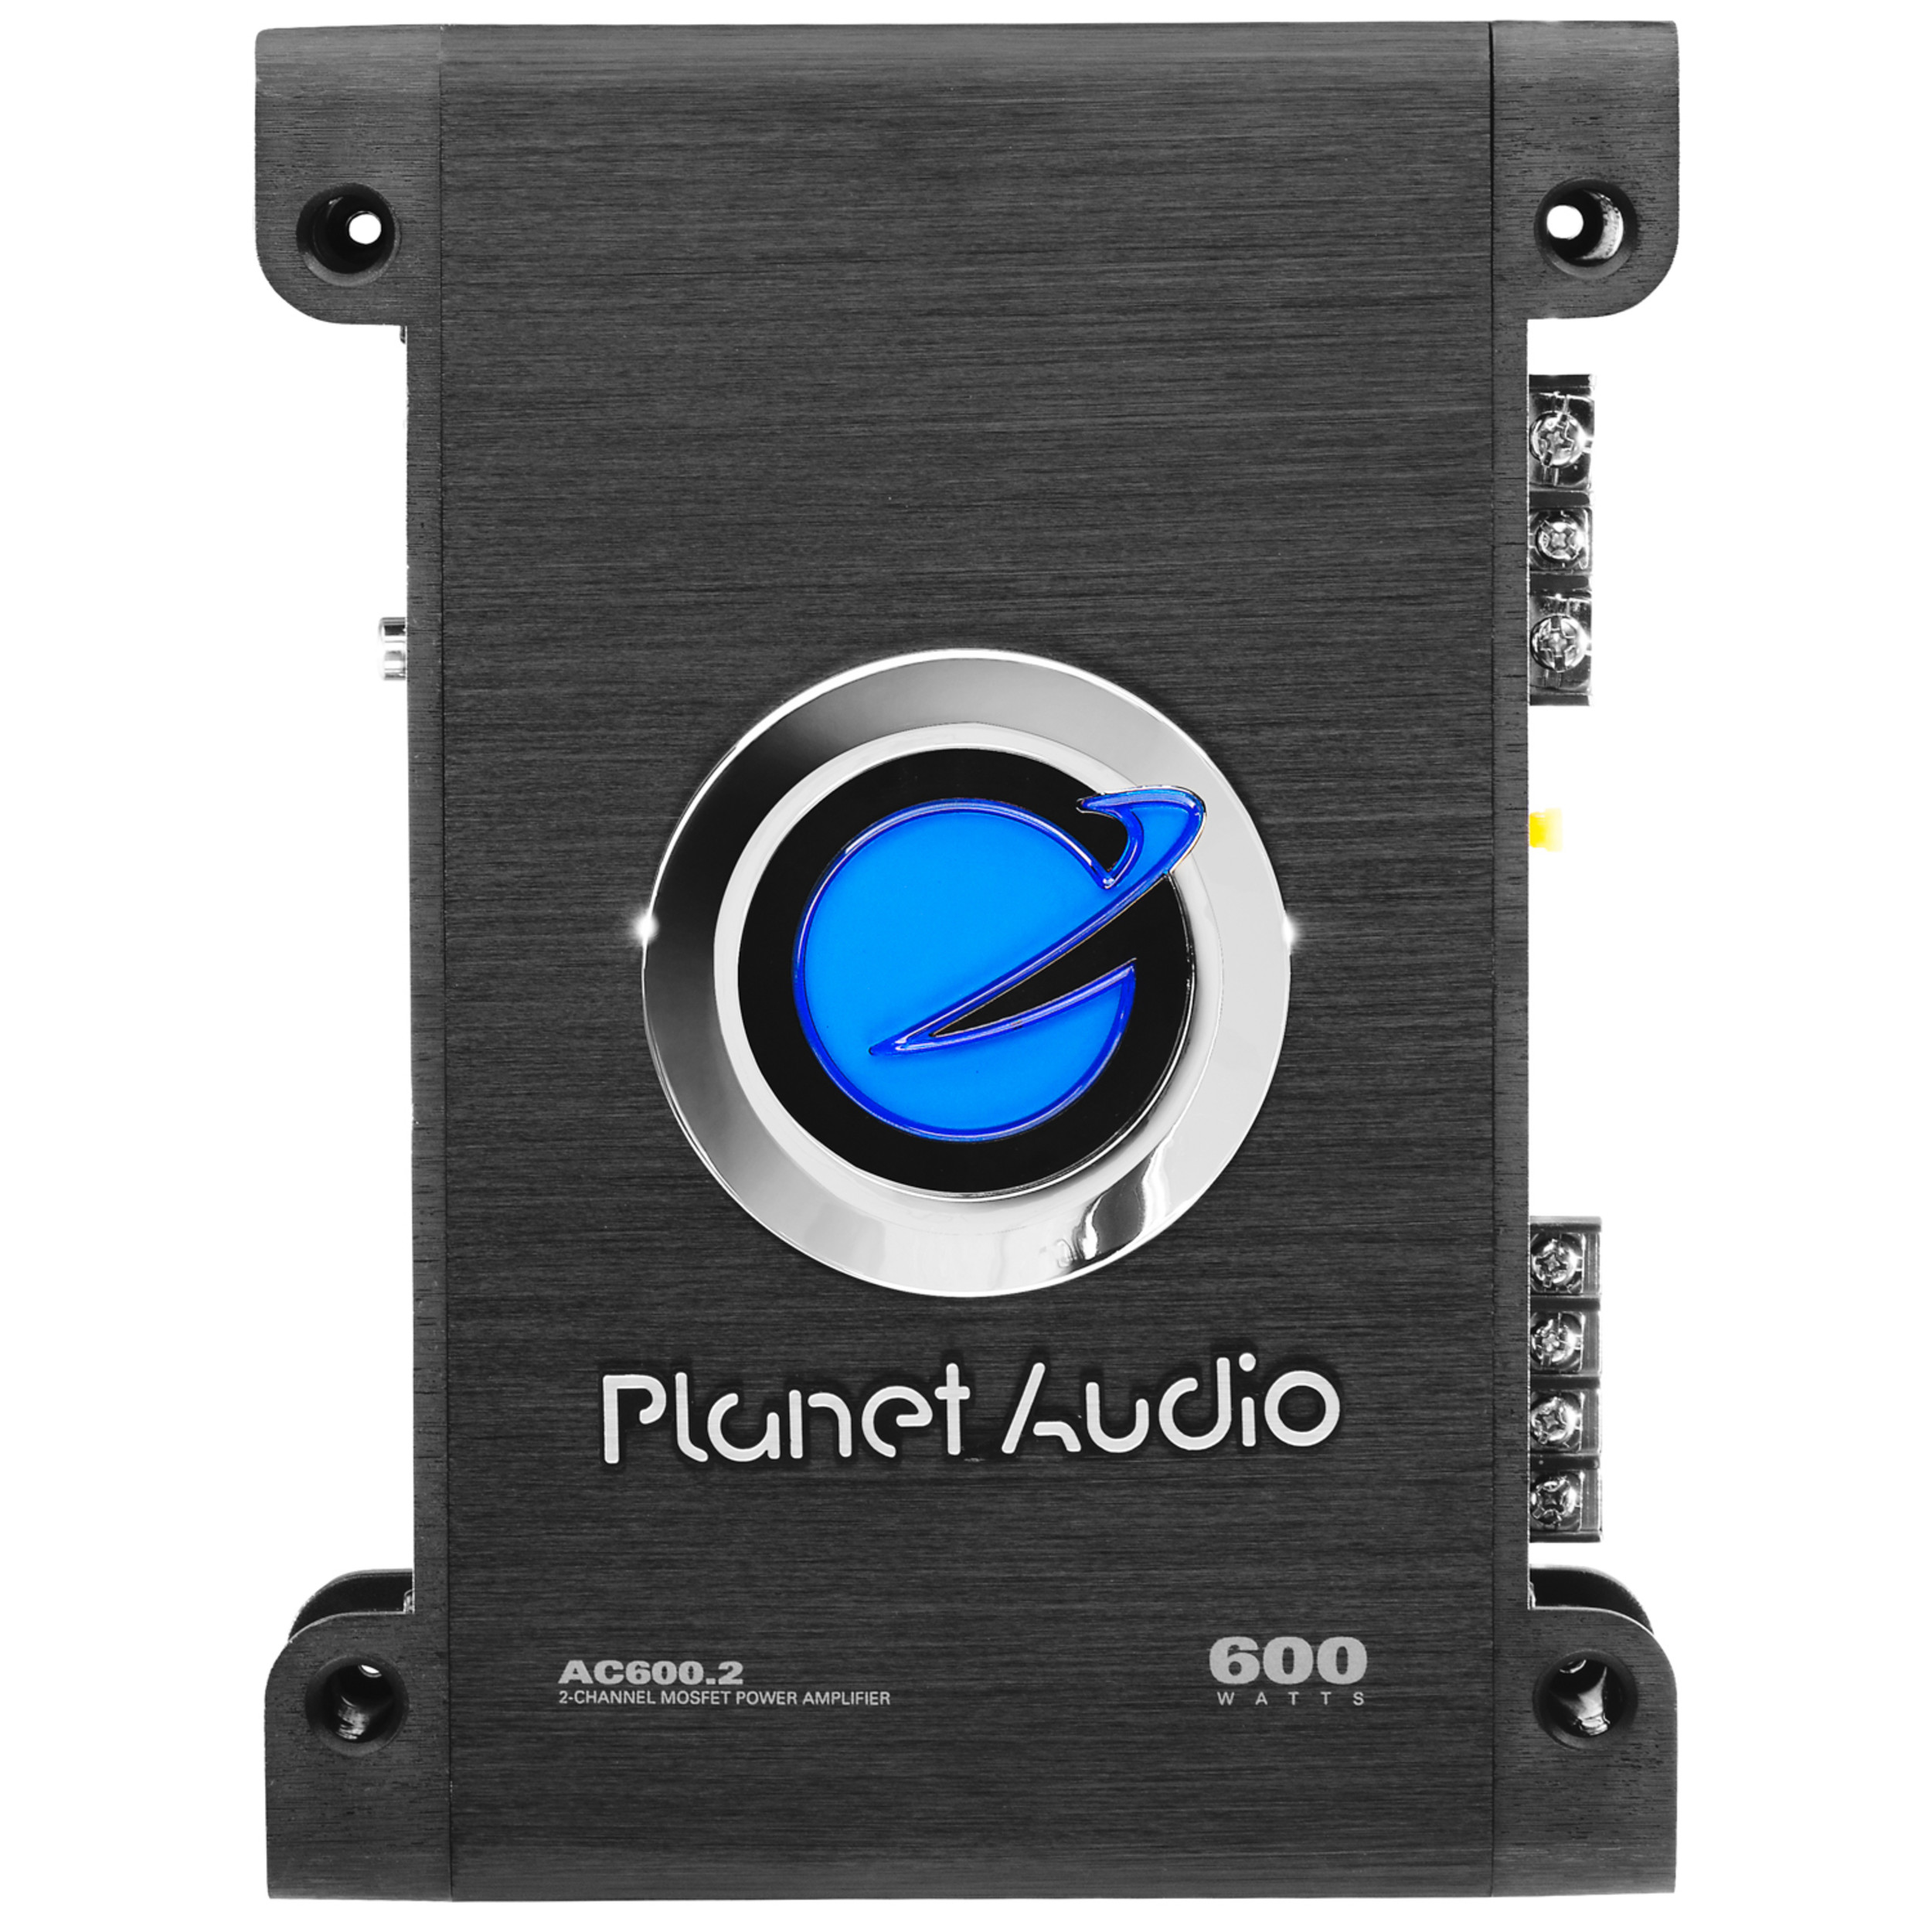 Planet Audio AC600.2 Anarchy Series Car Audio Amplifier - 600 High Output, 2 Channel, Class A/B, High/Low Level Inputs, High/Low Pass Crossover, Bridgeable, Full Range, For Stereo and Subwoofer - image 4 of 9